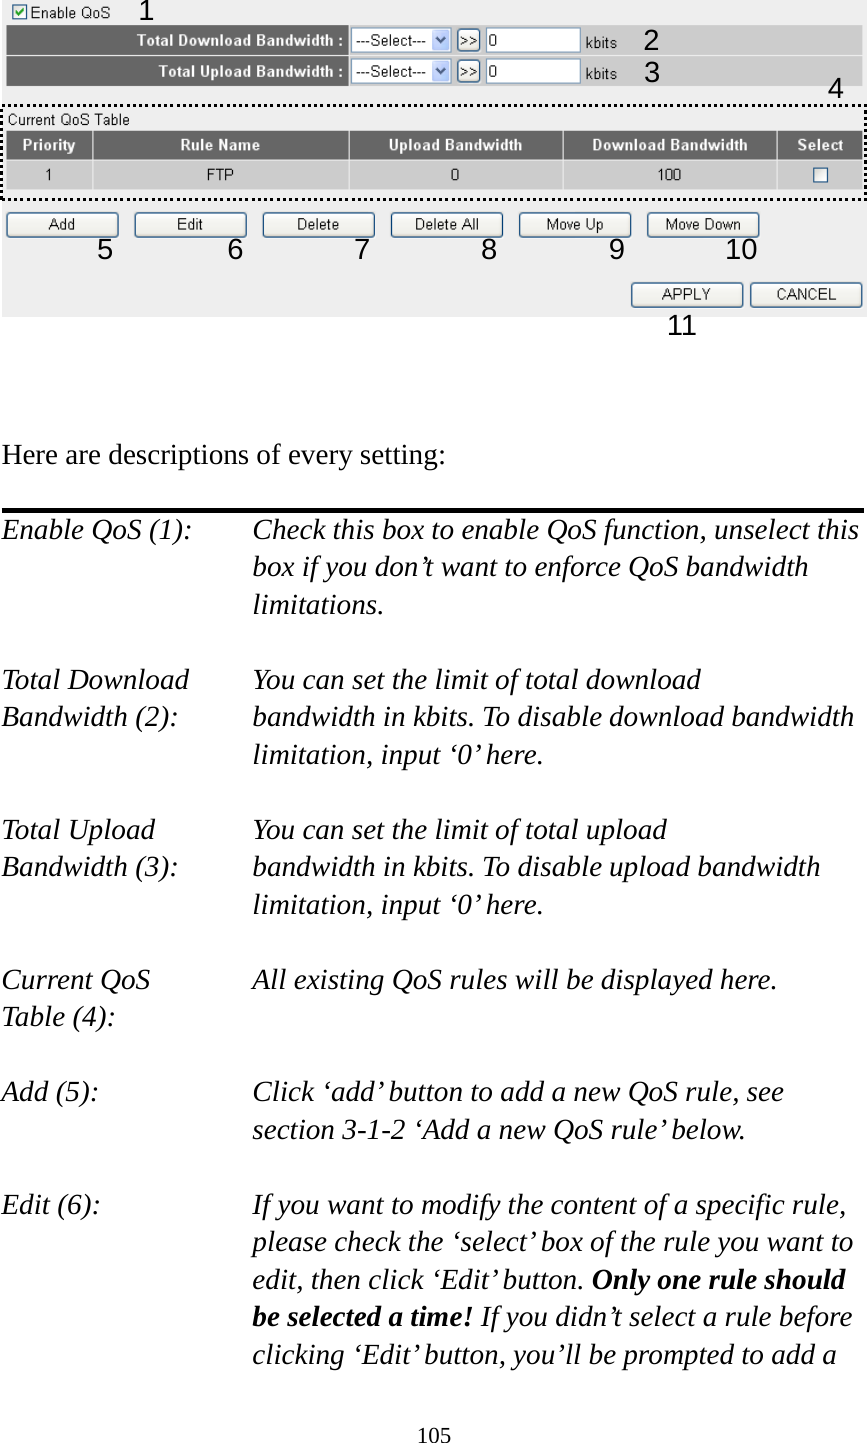 105      Here are descriptions of every setting:  Enable QoS (1):   Check this box to enable QoS function, unselect this box if you don’t want to enforce QoS bandwidth limitations.  Total Download    You can set the limit of total download   Bandwidth (2):   bandwidth in kbits. To disable download bandwidth limitation, input ‘0’ here.  Total Upload      You can set the limit of total upload Bandwidth (3):   bandwidth in kbits. To disable upload bandwidth limitation, input ‘0’ here.  Current QoS     All existing QoS rules will be displayed here. Table (4):    Add (5): Click ‘add’ button to add a new QoS rule, see section 3-1-2 ‘Add a new QoS rule’ below.  Edit (6):   If you want to modify the content of a specific rule, please check the ‘select’ box of the rule you want to edit, then click ‘Edit’ button. Only one rule should be selected a time! If you didn’t select a rule before clicking ‘Edit’ button, you’ll be prompted to add a 1 2 3 4 5 6 7 8 9 10 11 